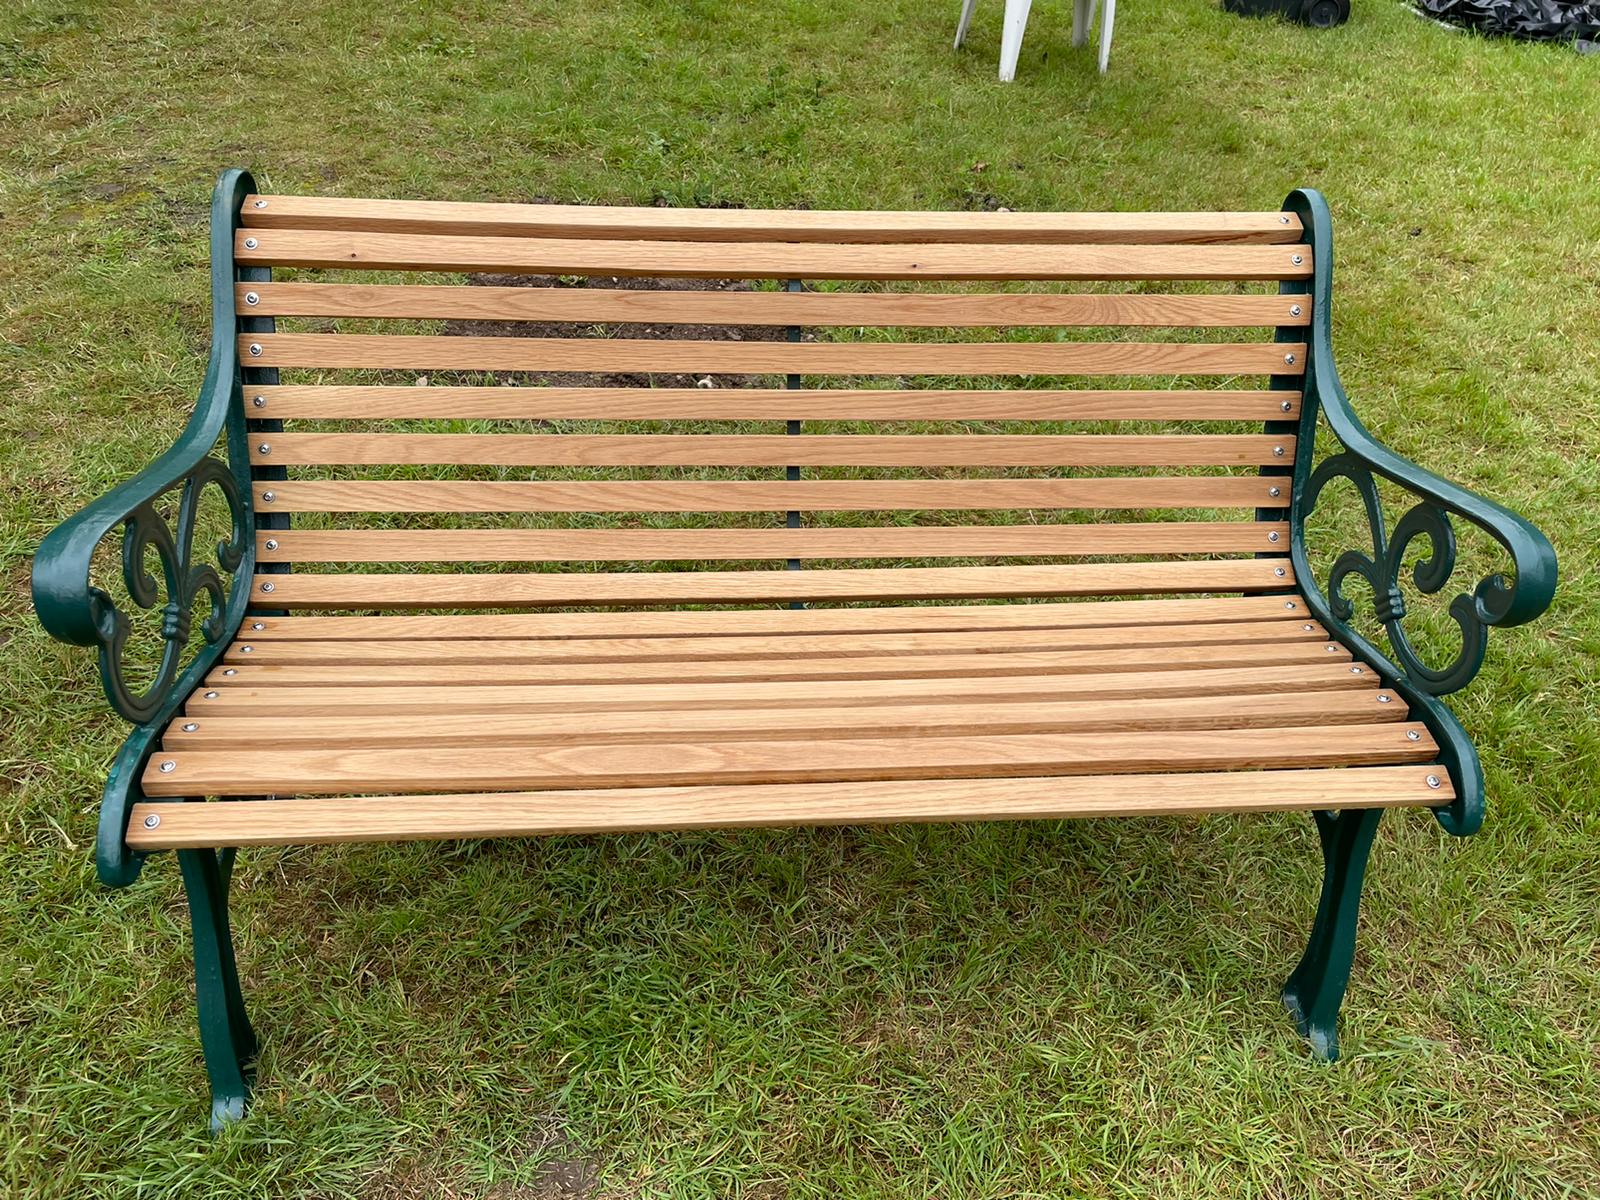 Jack and his dad worked so hard on this bench - doesn't it look great?